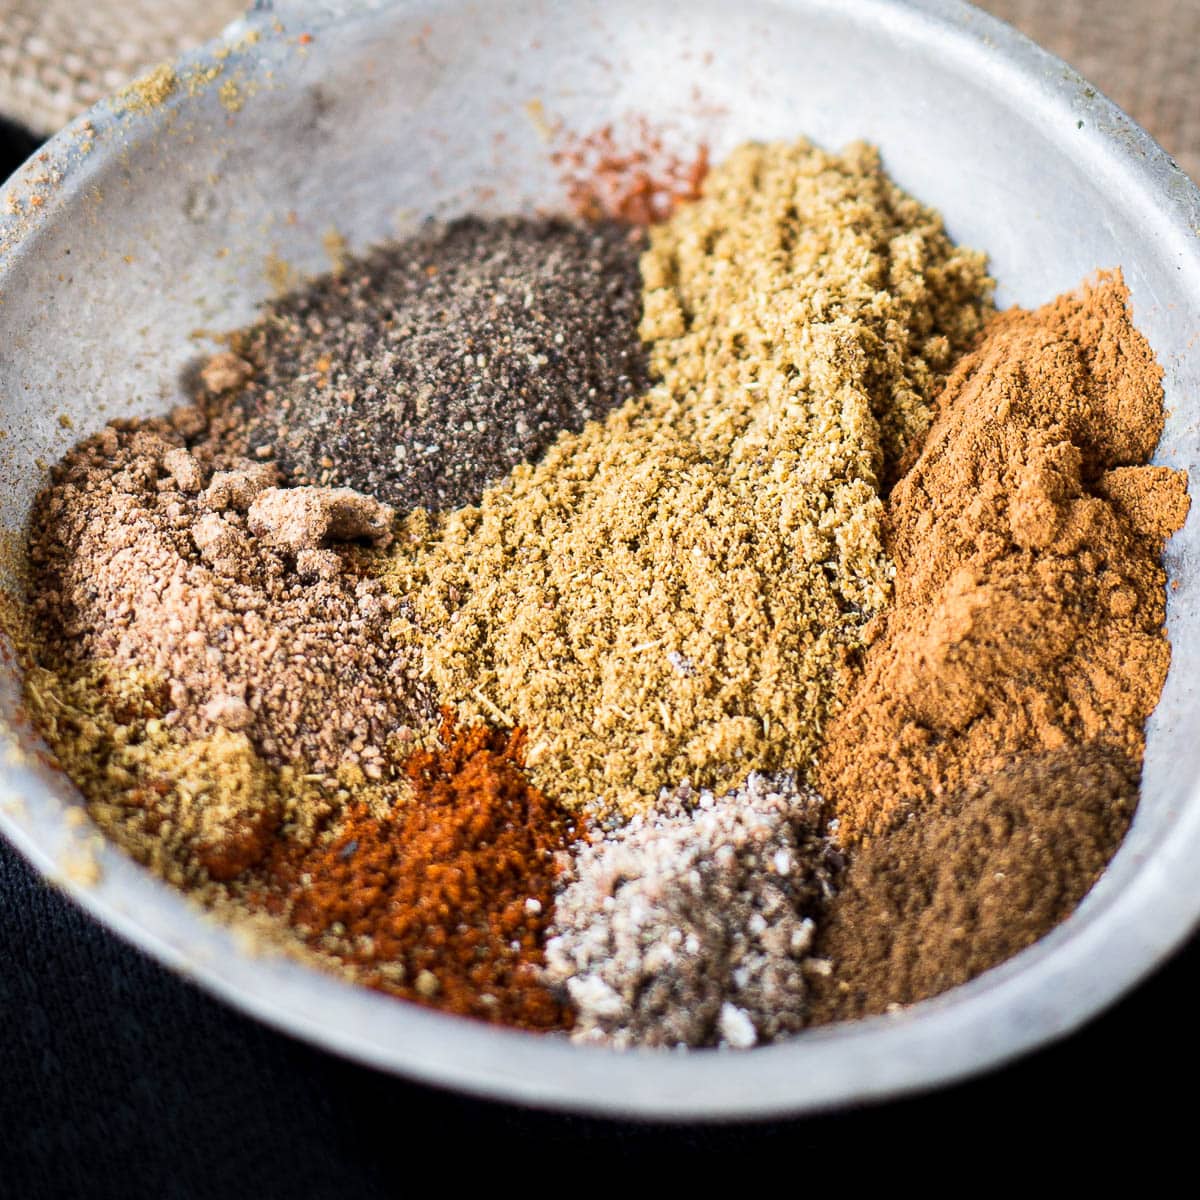 The Spice Magic: South Indian Gun Powder Explained!